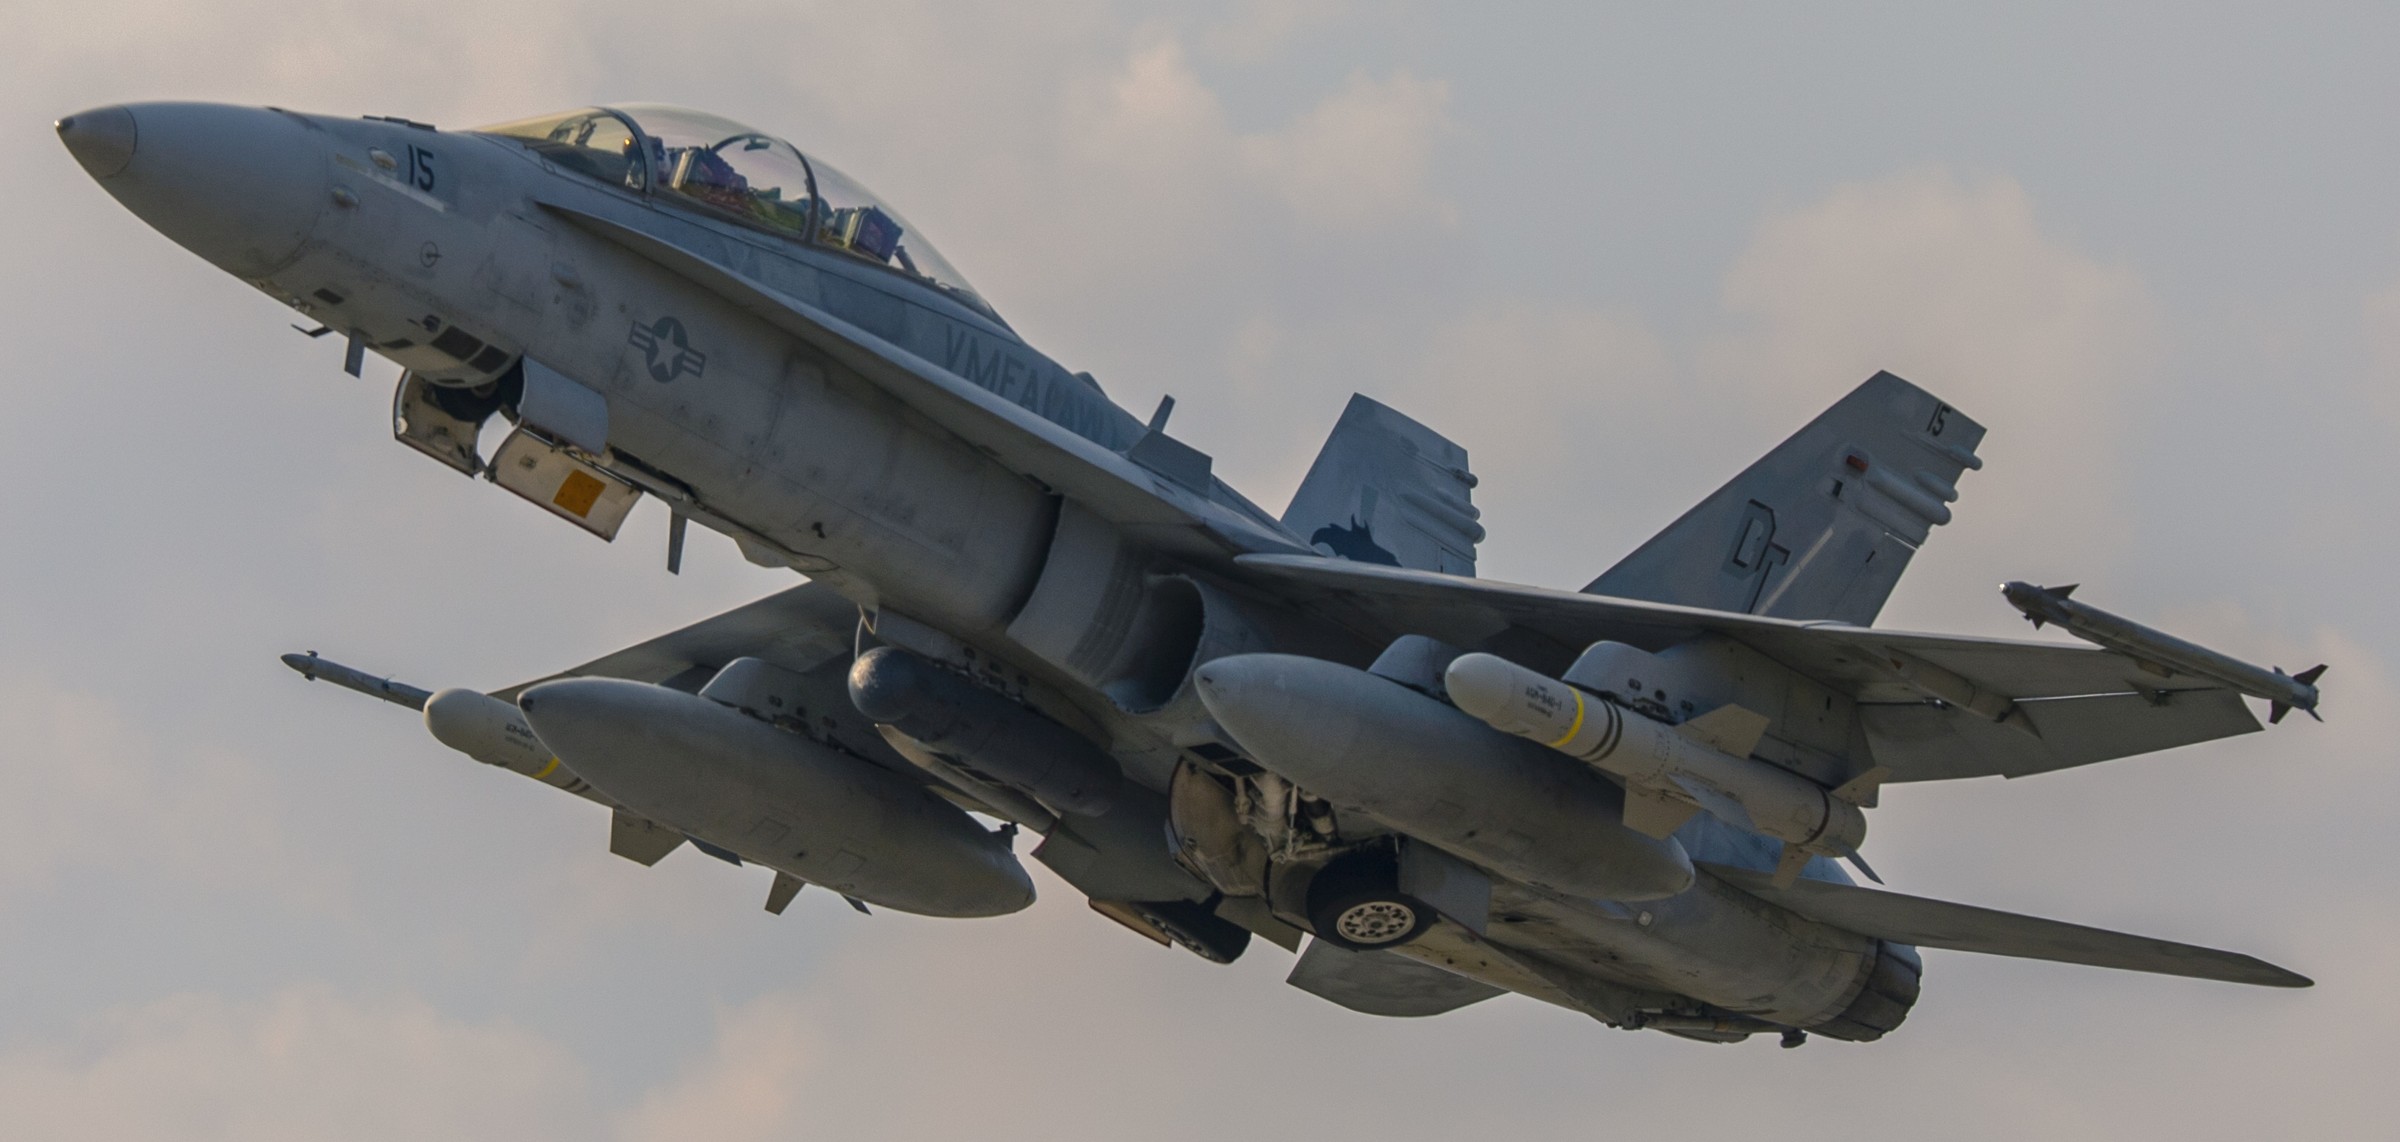 vmfa(aw)-242 bats marine all-weather fighter attack squadron usmc f/a-18d hornet 118 mcas iwakuni japan